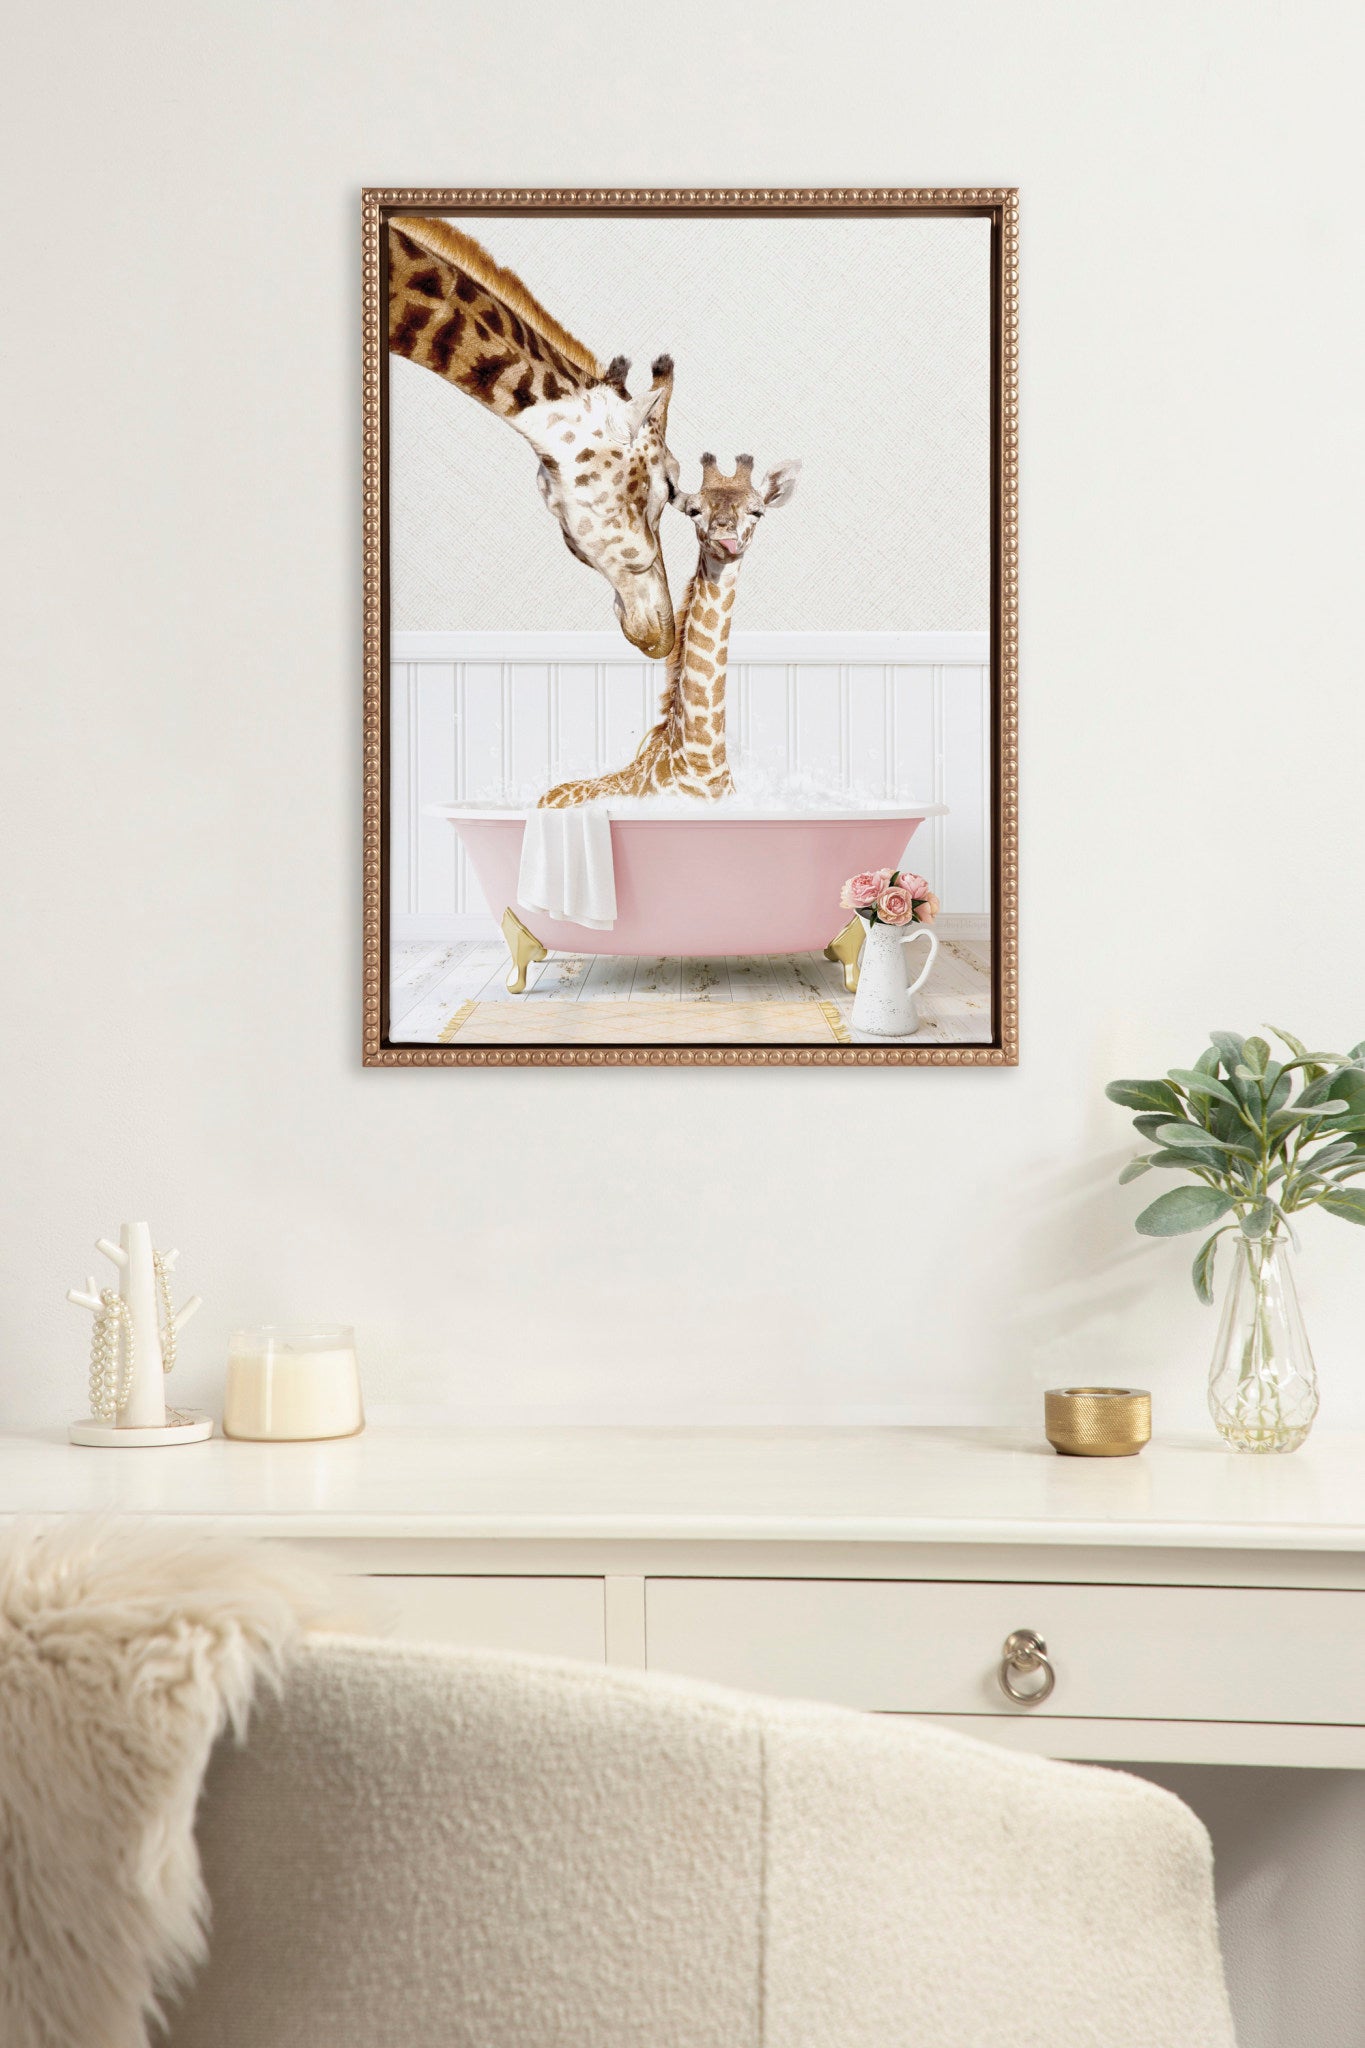 Sylvie Beaded Mother and Baby Giraffe in Cottage Rose Bath Framed Canvas by Amy Peterson